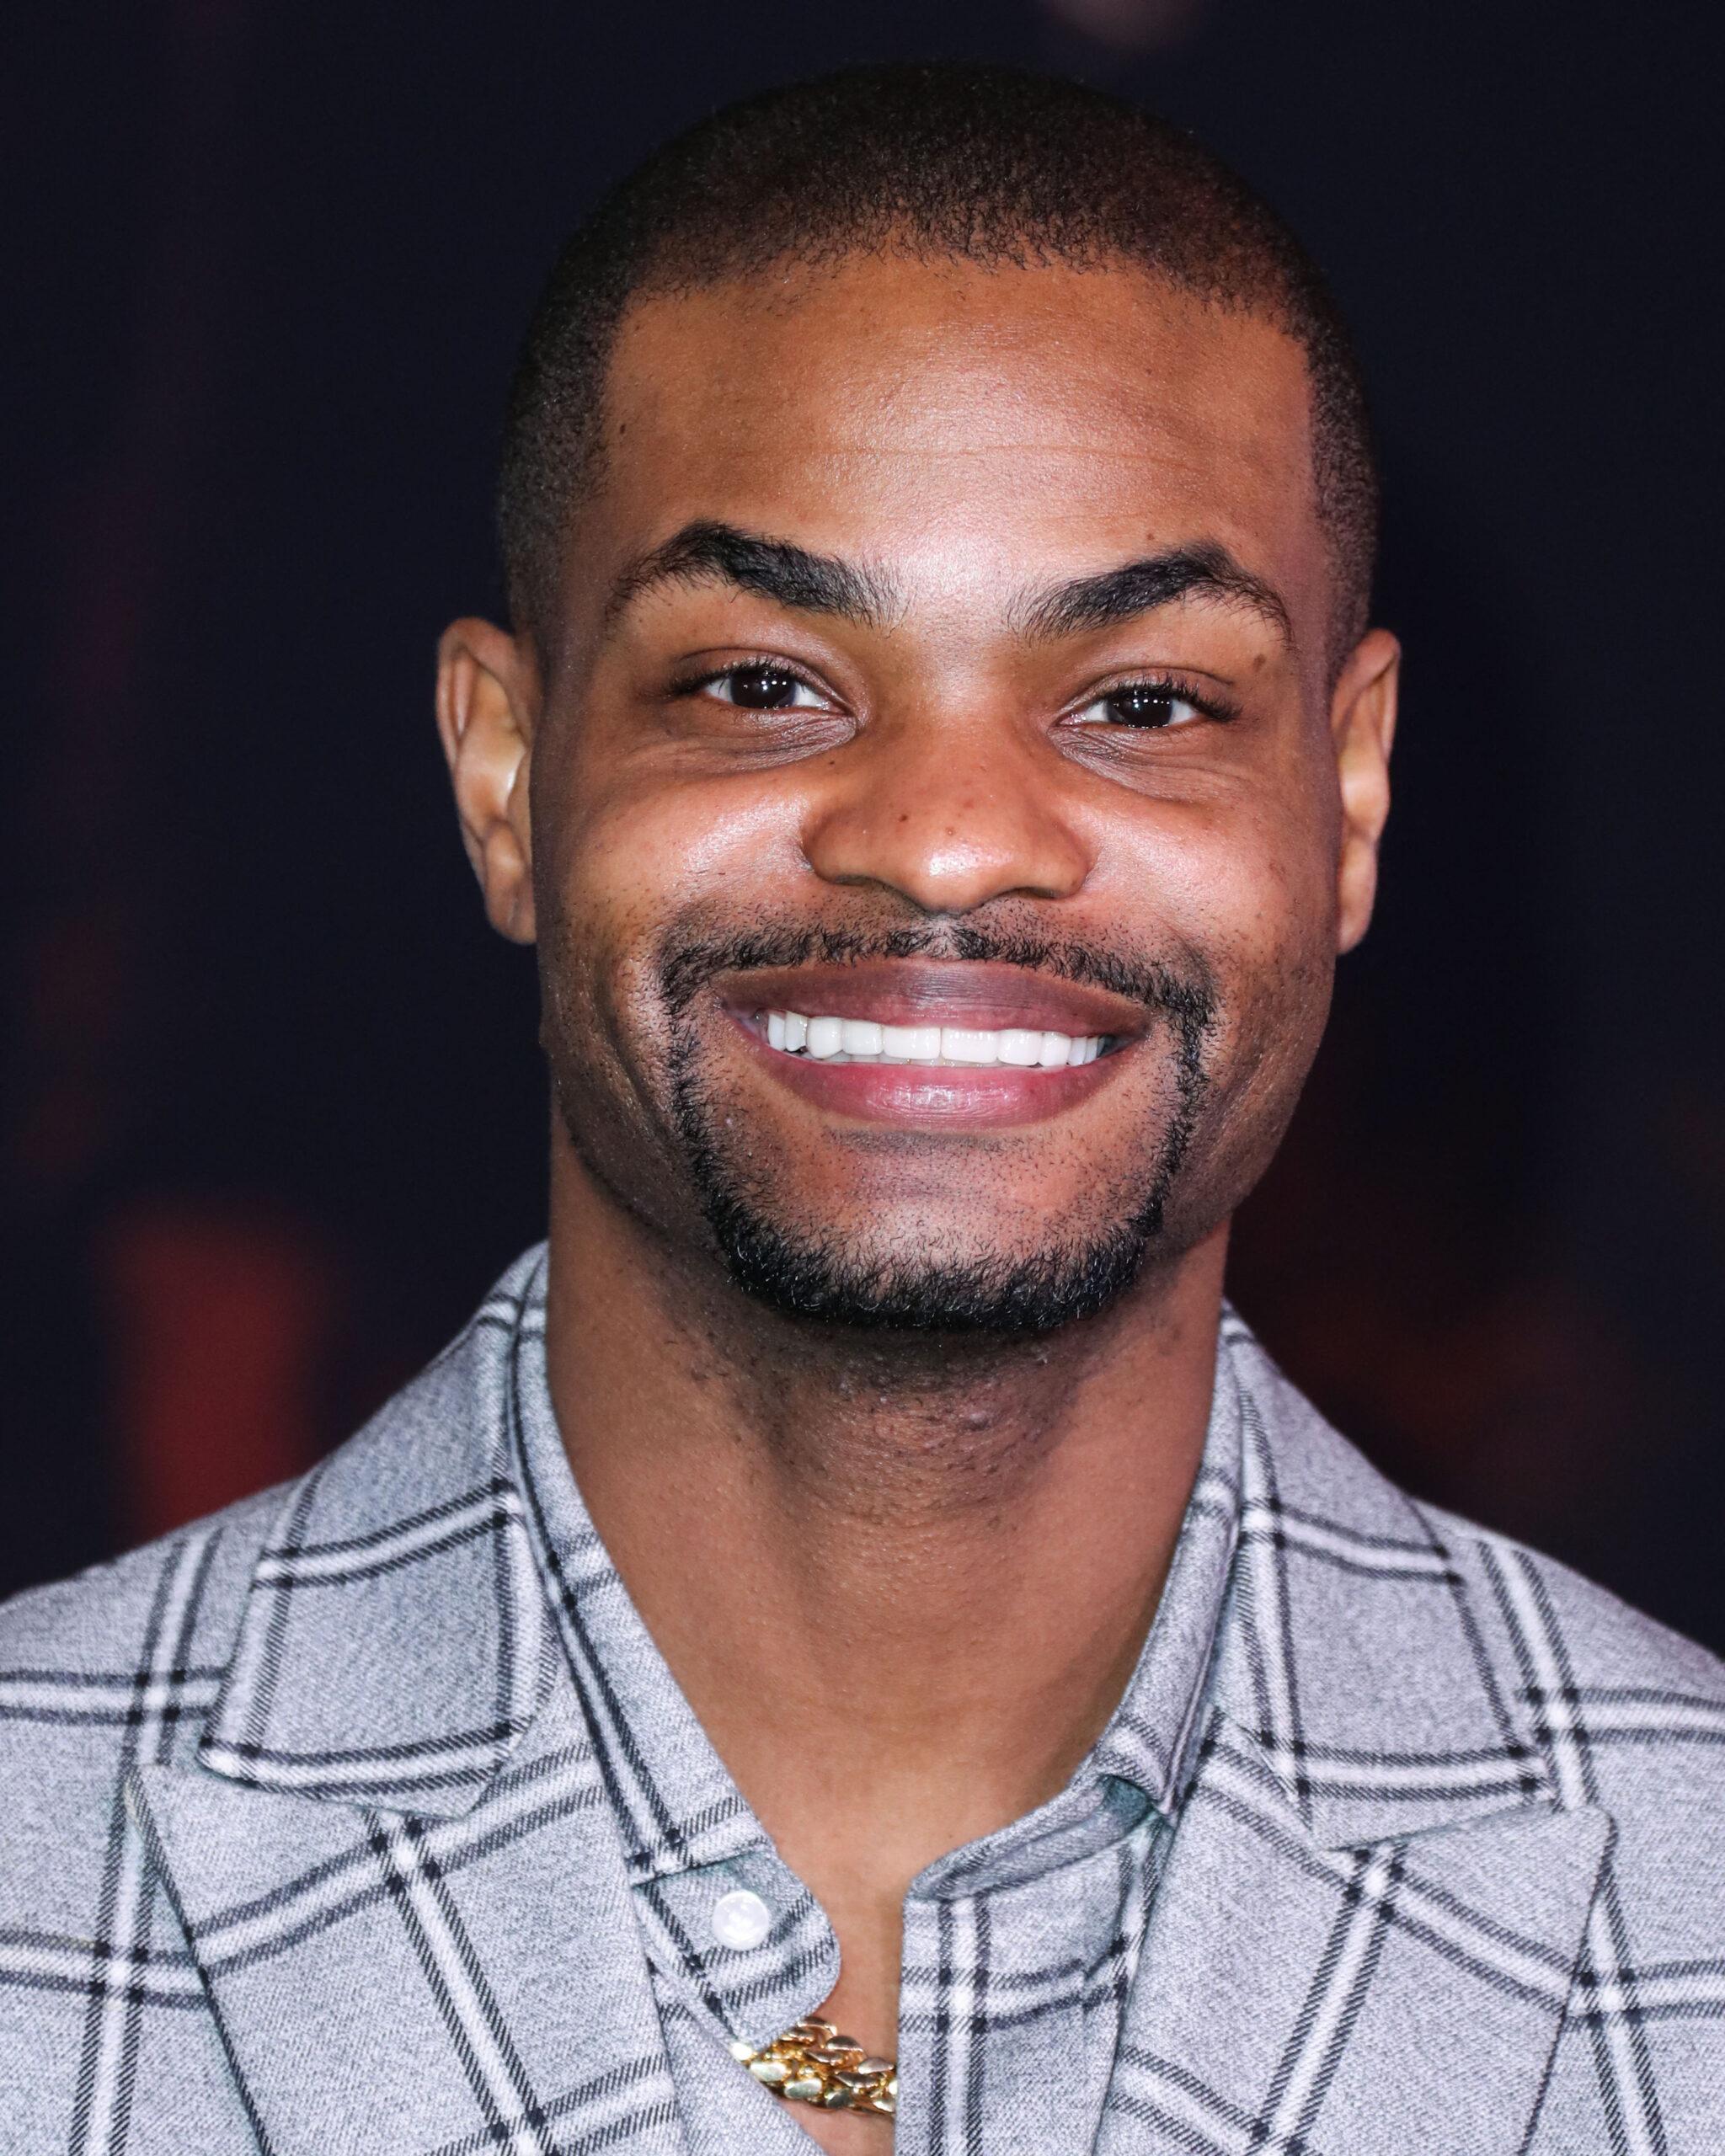 King Bach Loses Over $200K Worth Of Cash, Jewelry In Home Burglary